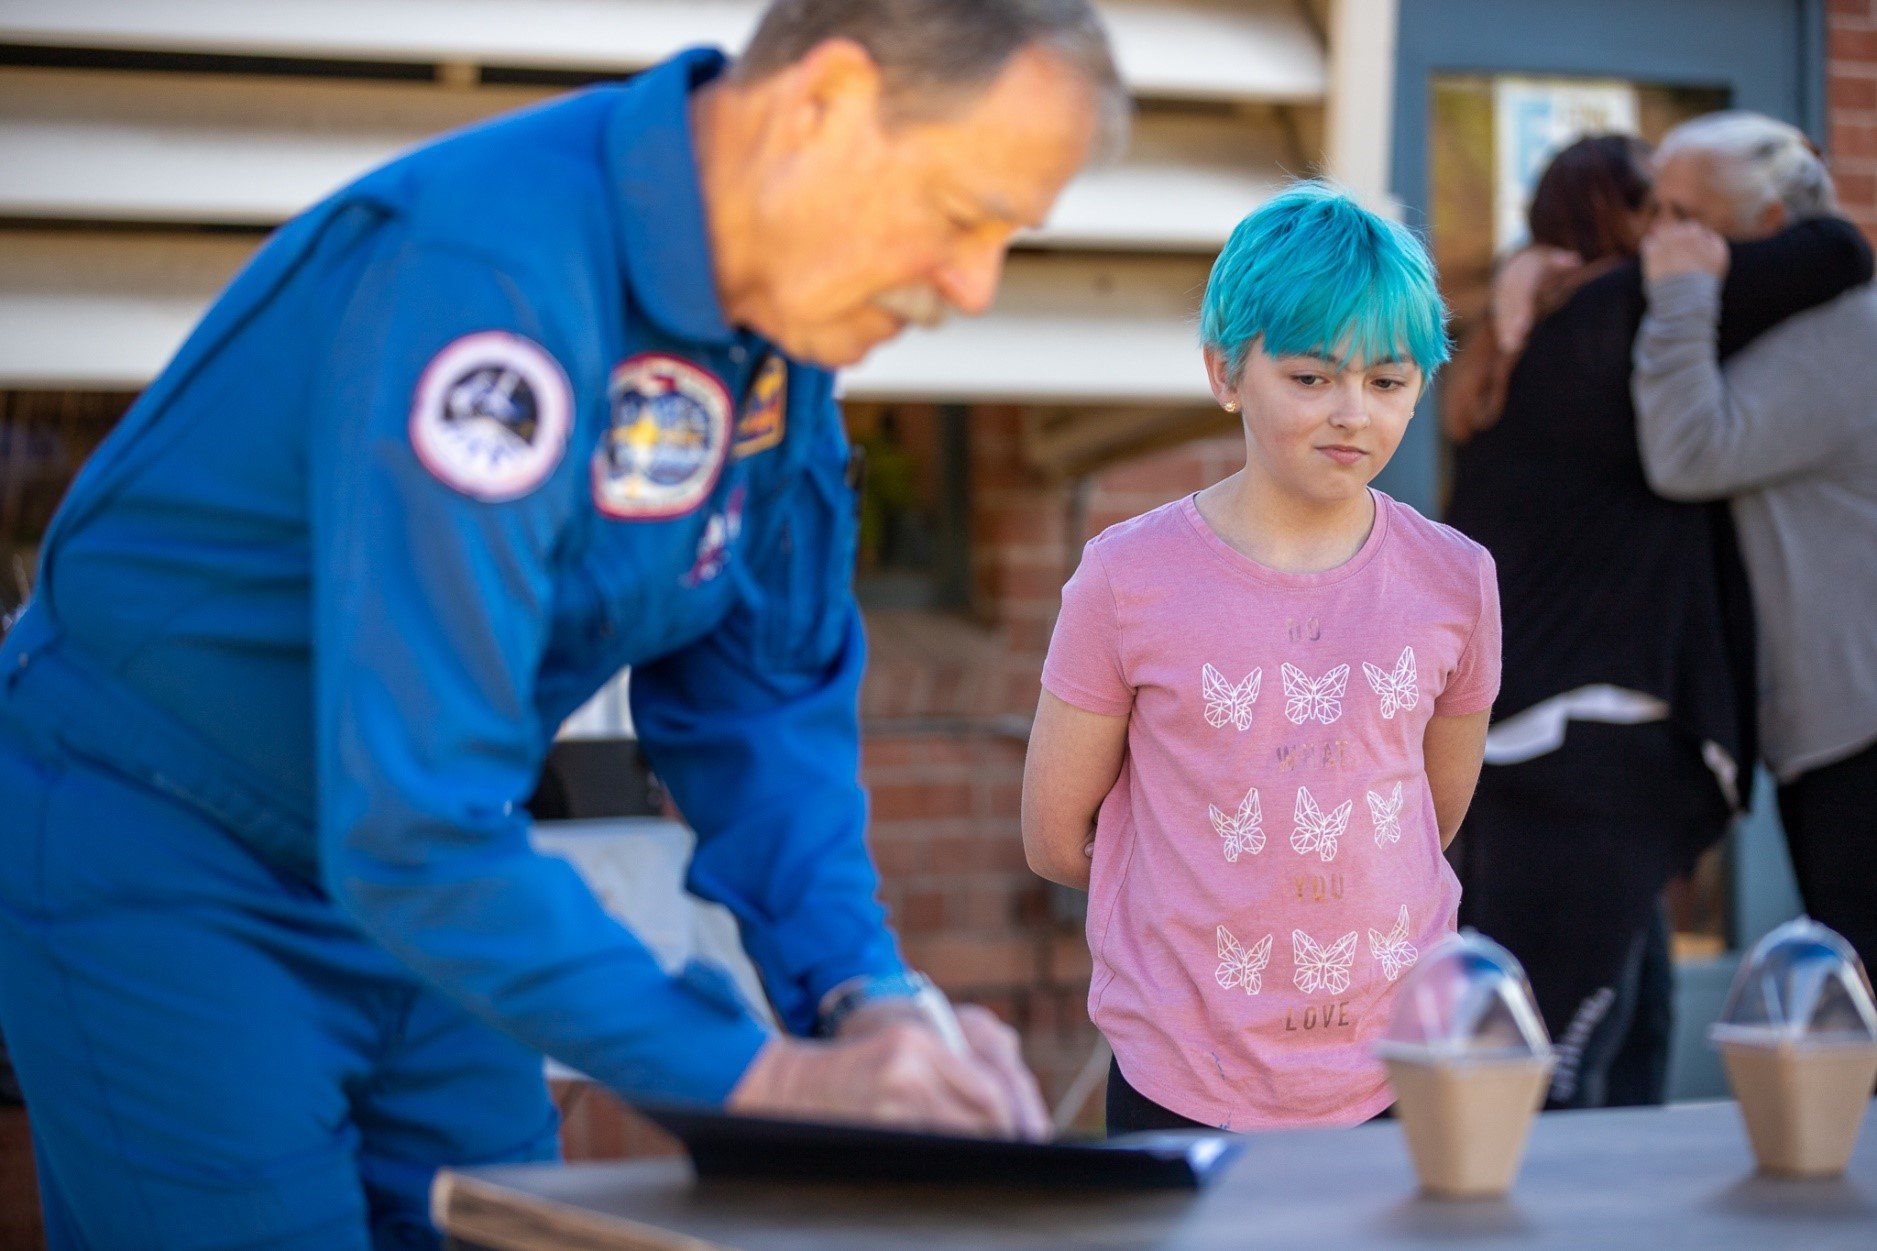 Former astronaut Hoot Gibson signs an autograph for a girl with short blue hair